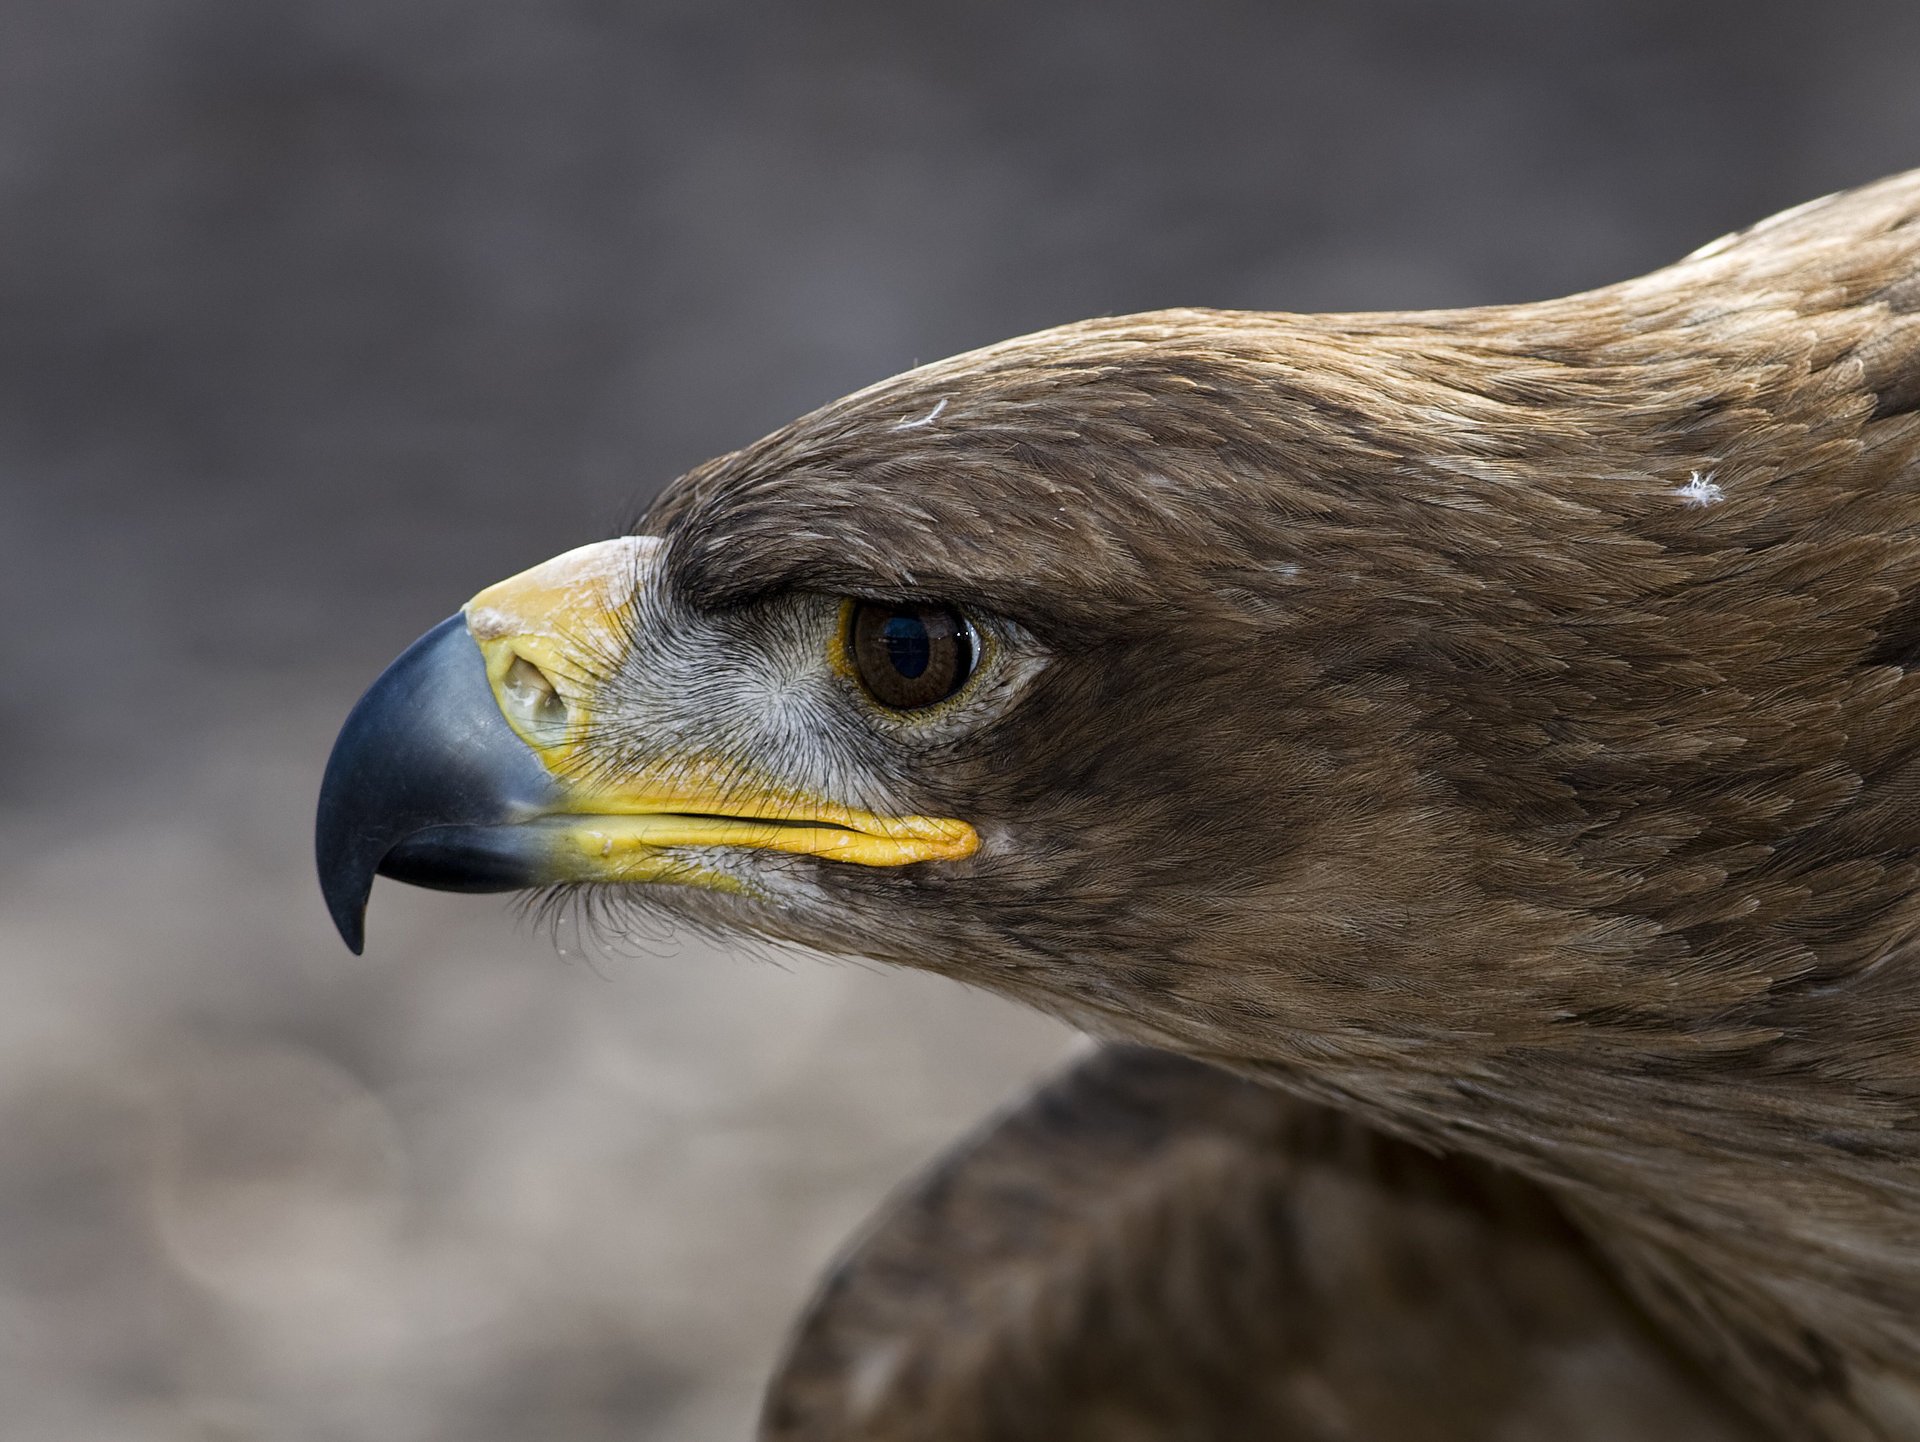 Macrophotography of the eagle's head in profile